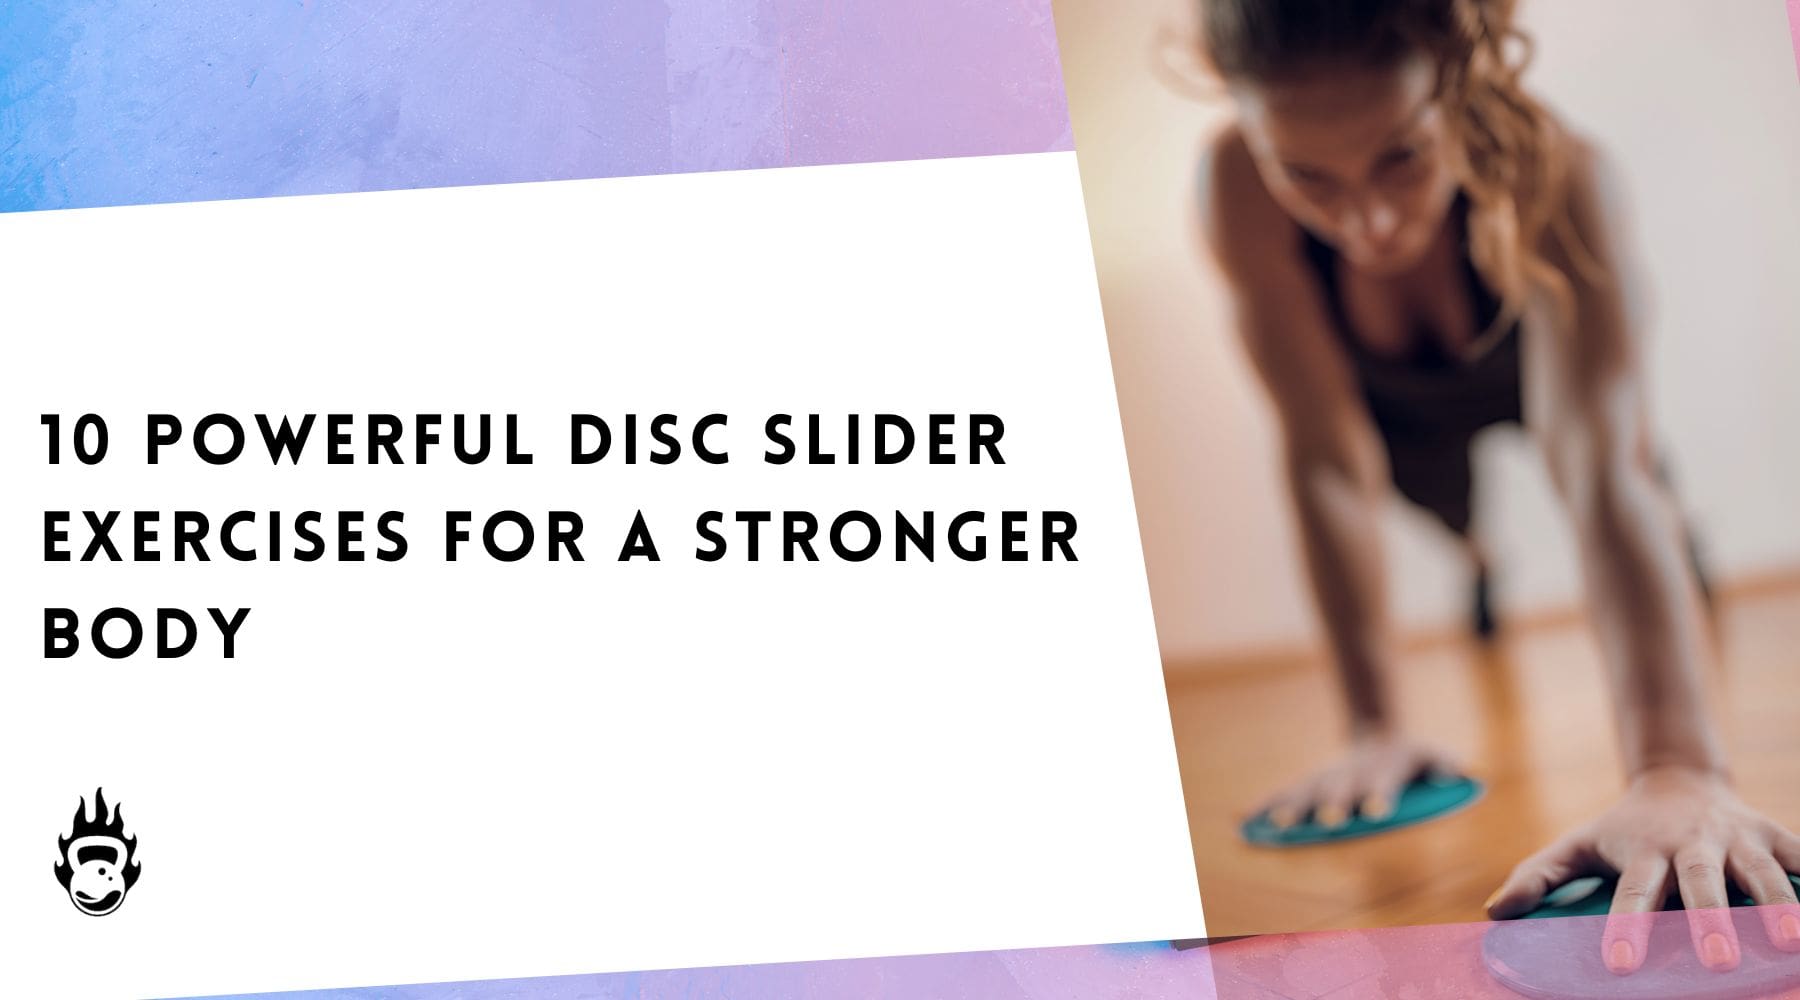 Sliders improve your balance and core strength by targeting the same m, Pilates